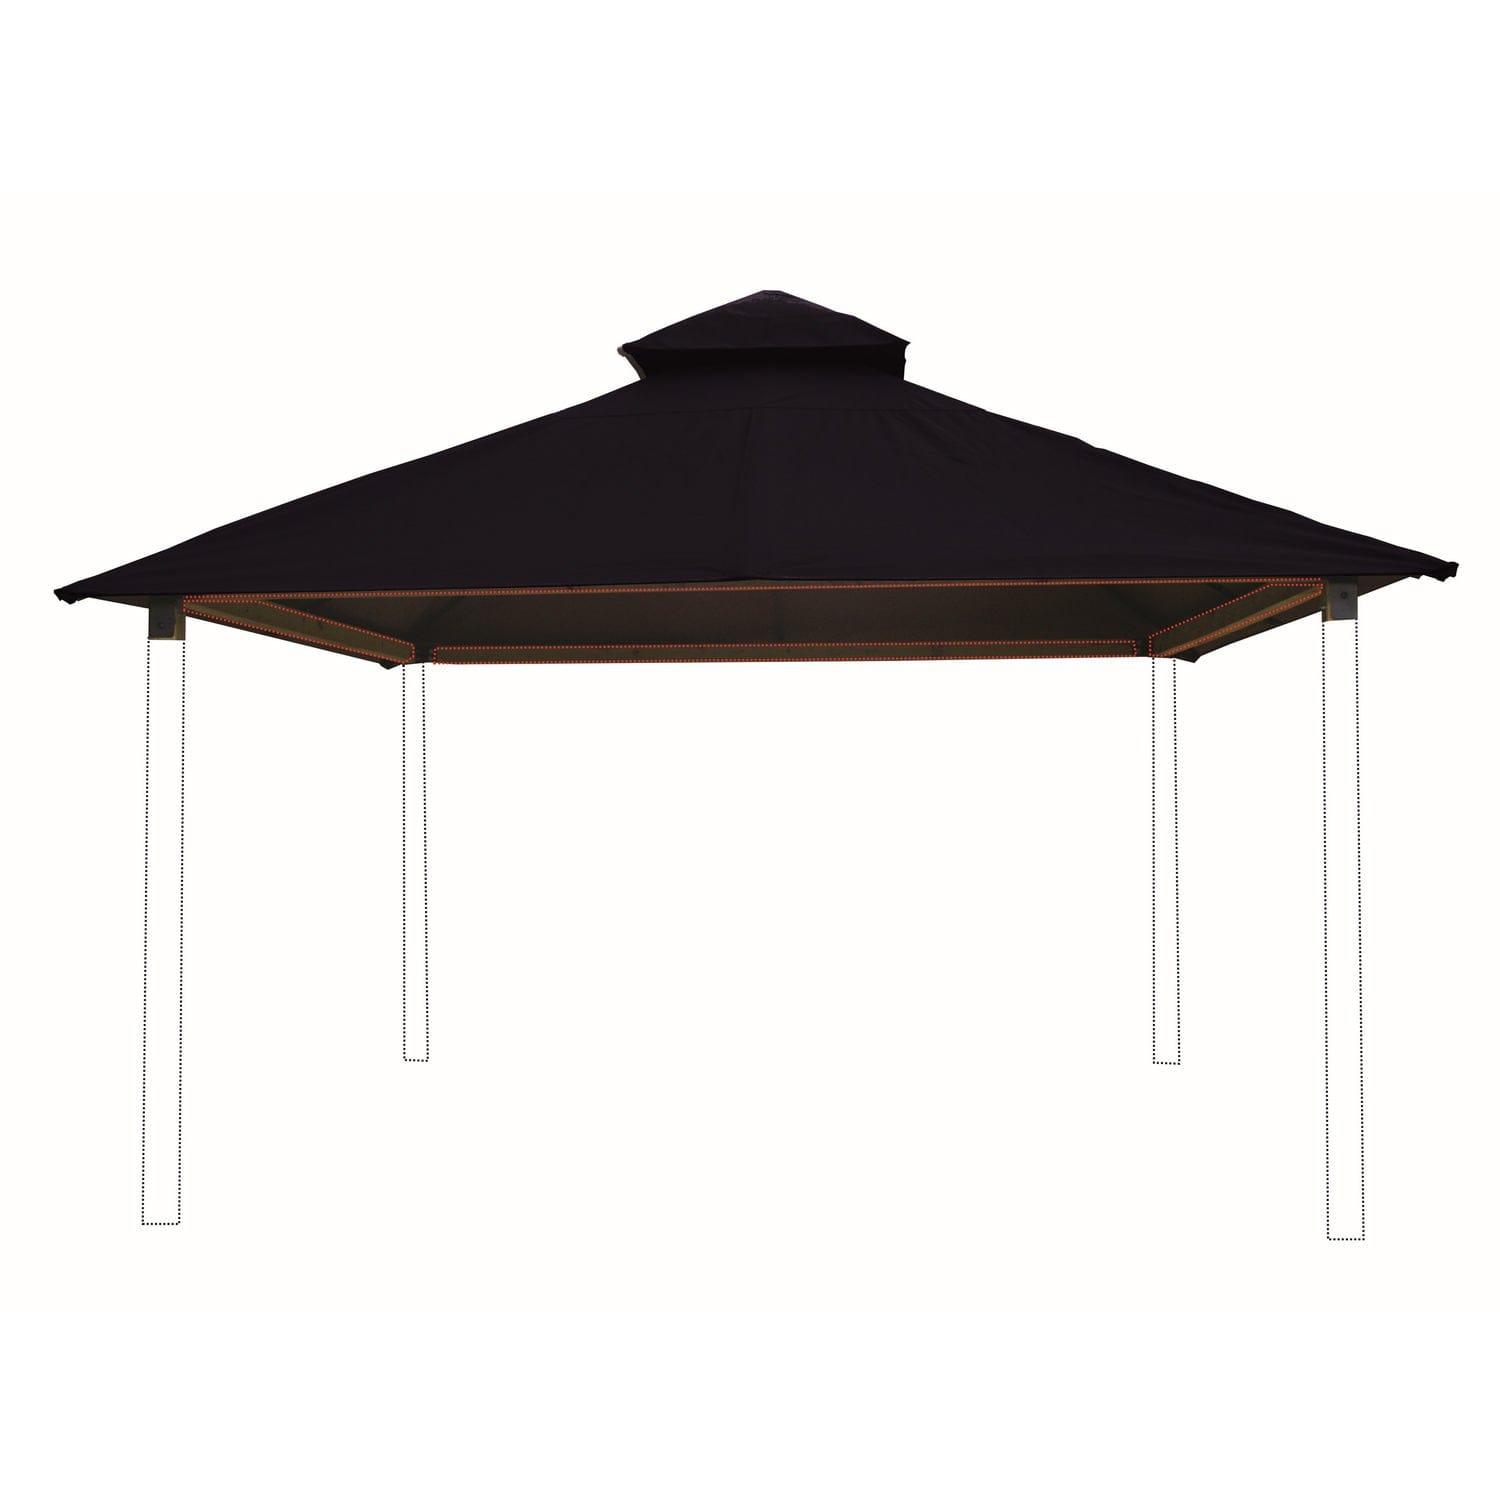 Riverstone Industries Soft Top Gazebos 12FT X 12FT Riverstone | ACACIA Gazebo Roof Framing and Mounting Kit With OutDURA Canopy - Captain Navy AGOK12-CAPTAIN-NAVY